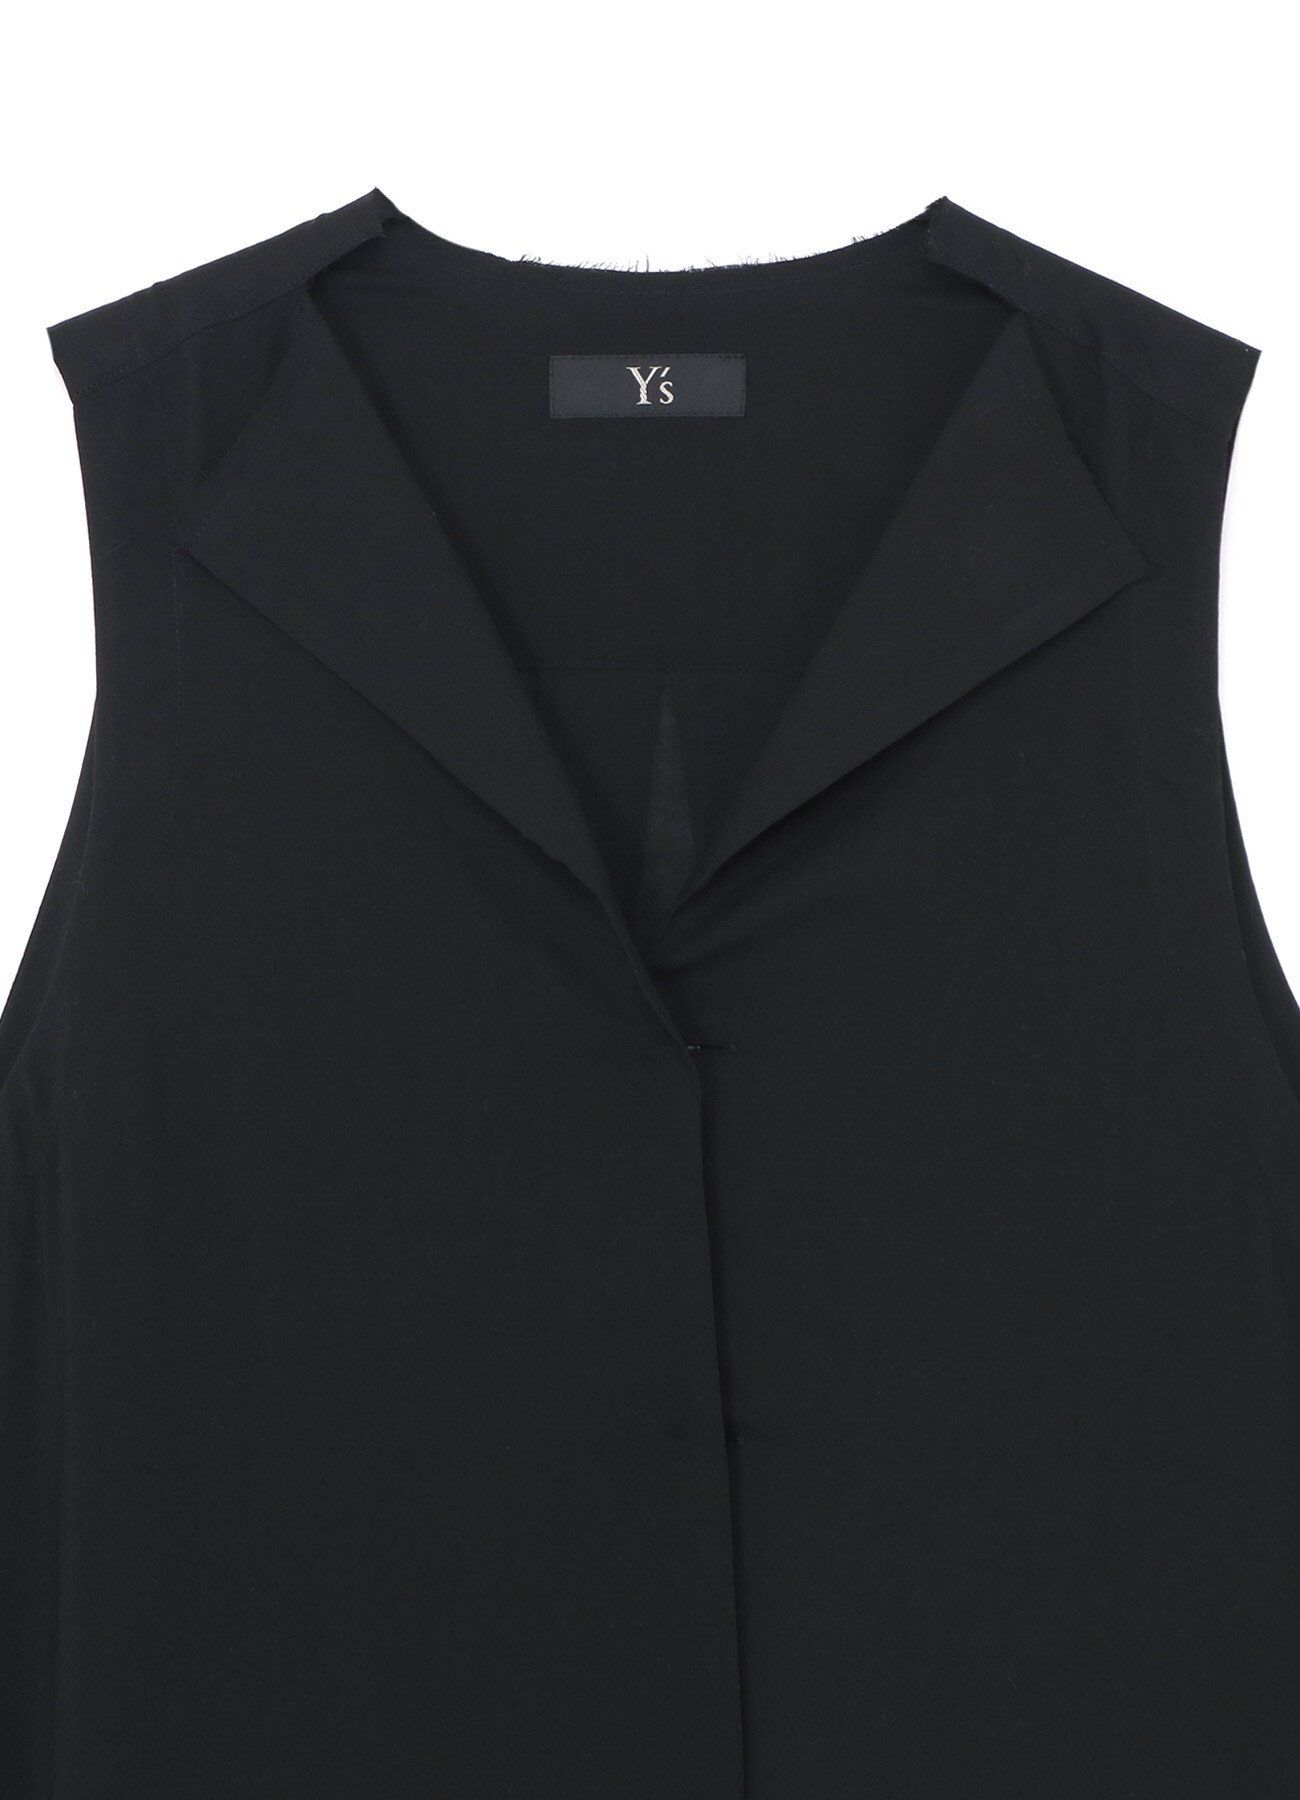 SLEEVELESS DRESS WITH NOTCHED LAPEL COLLAR